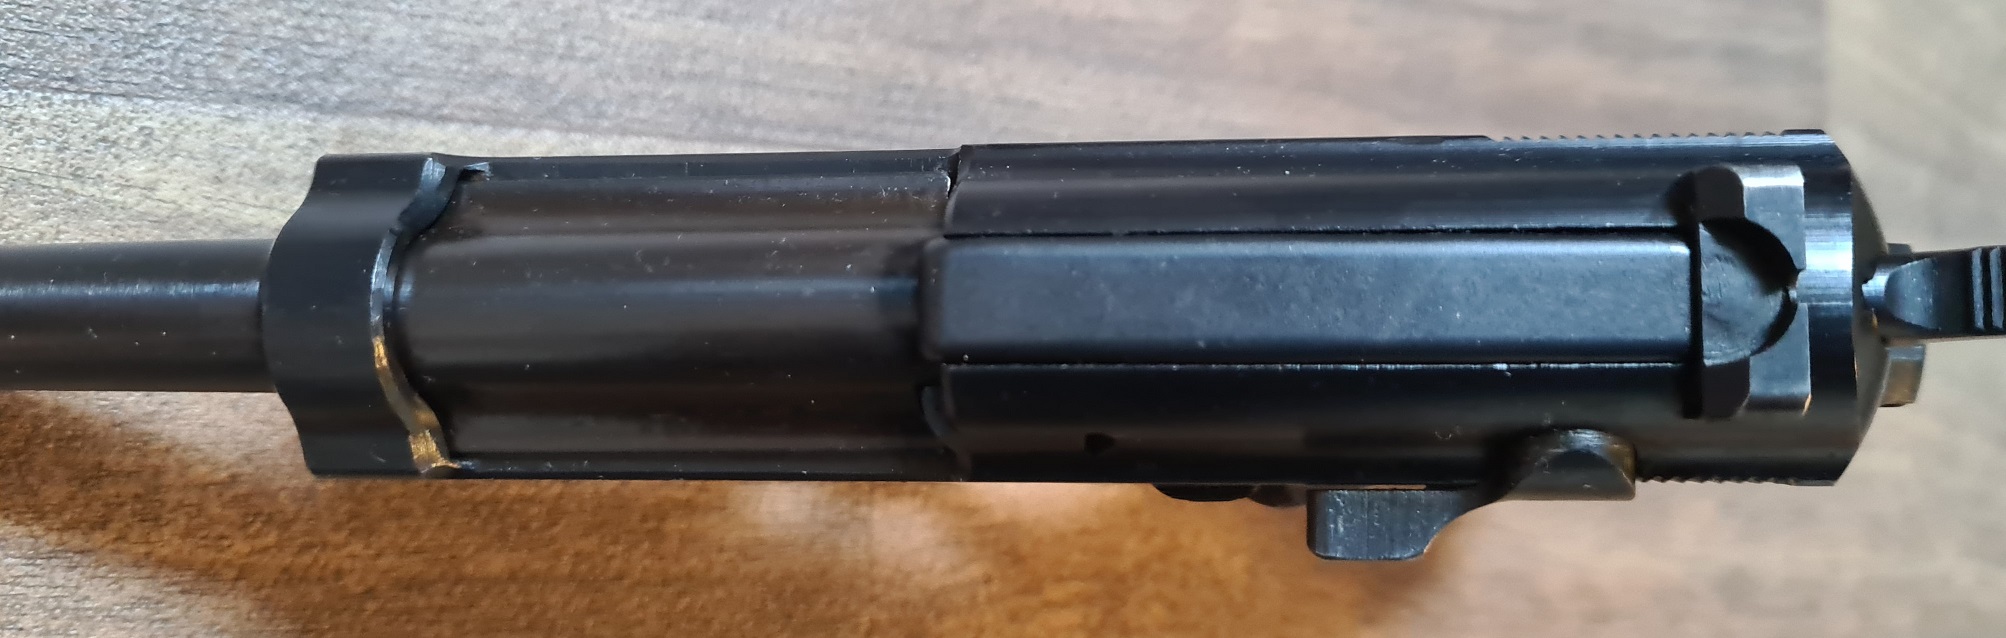 Walther P38 byf